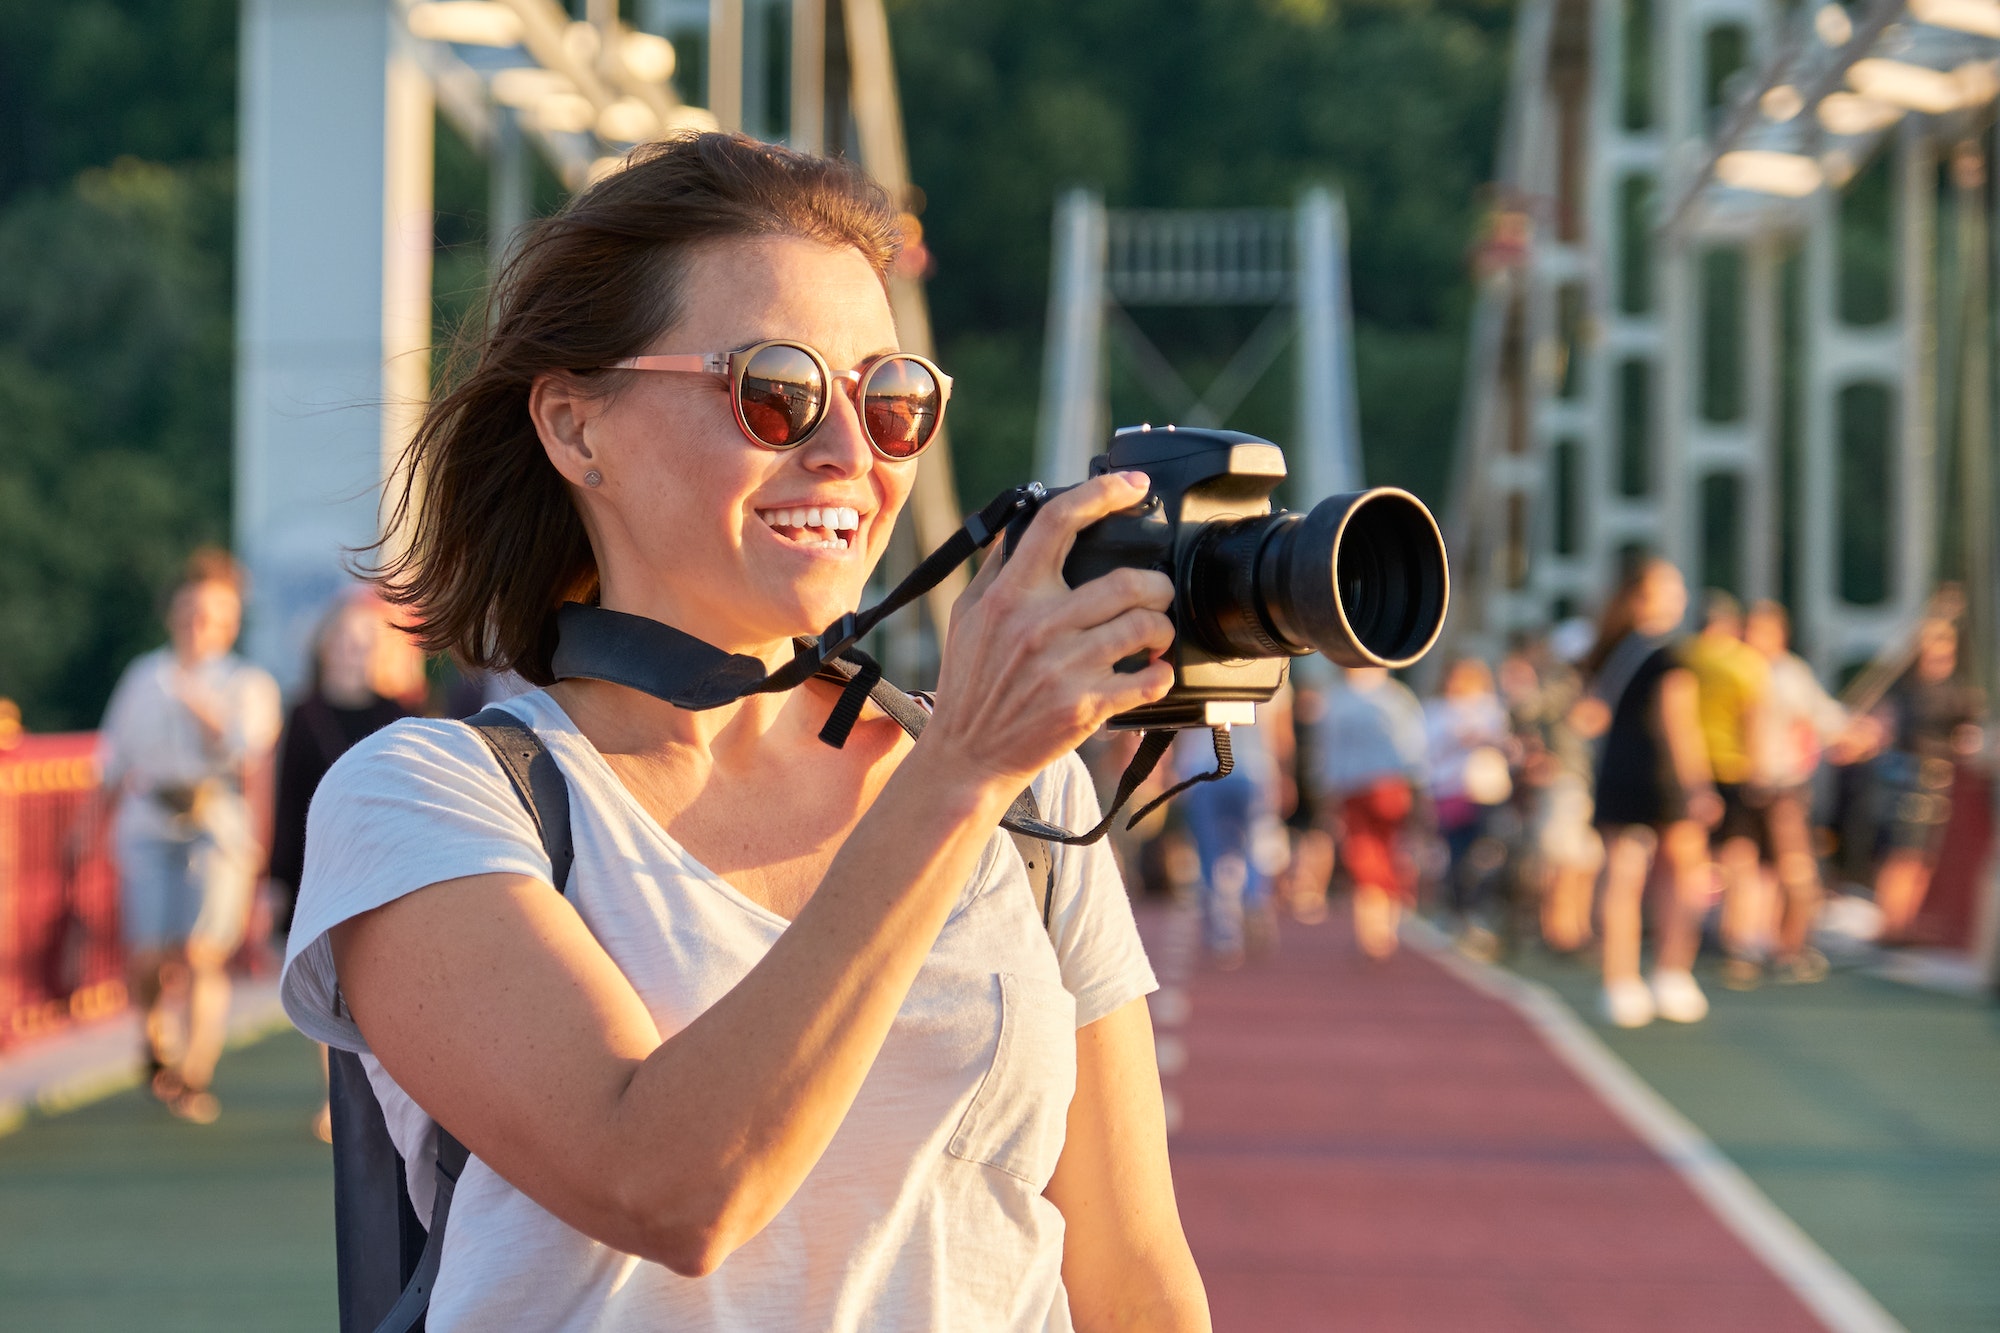 Mature woman photographer with camera taking photo picture